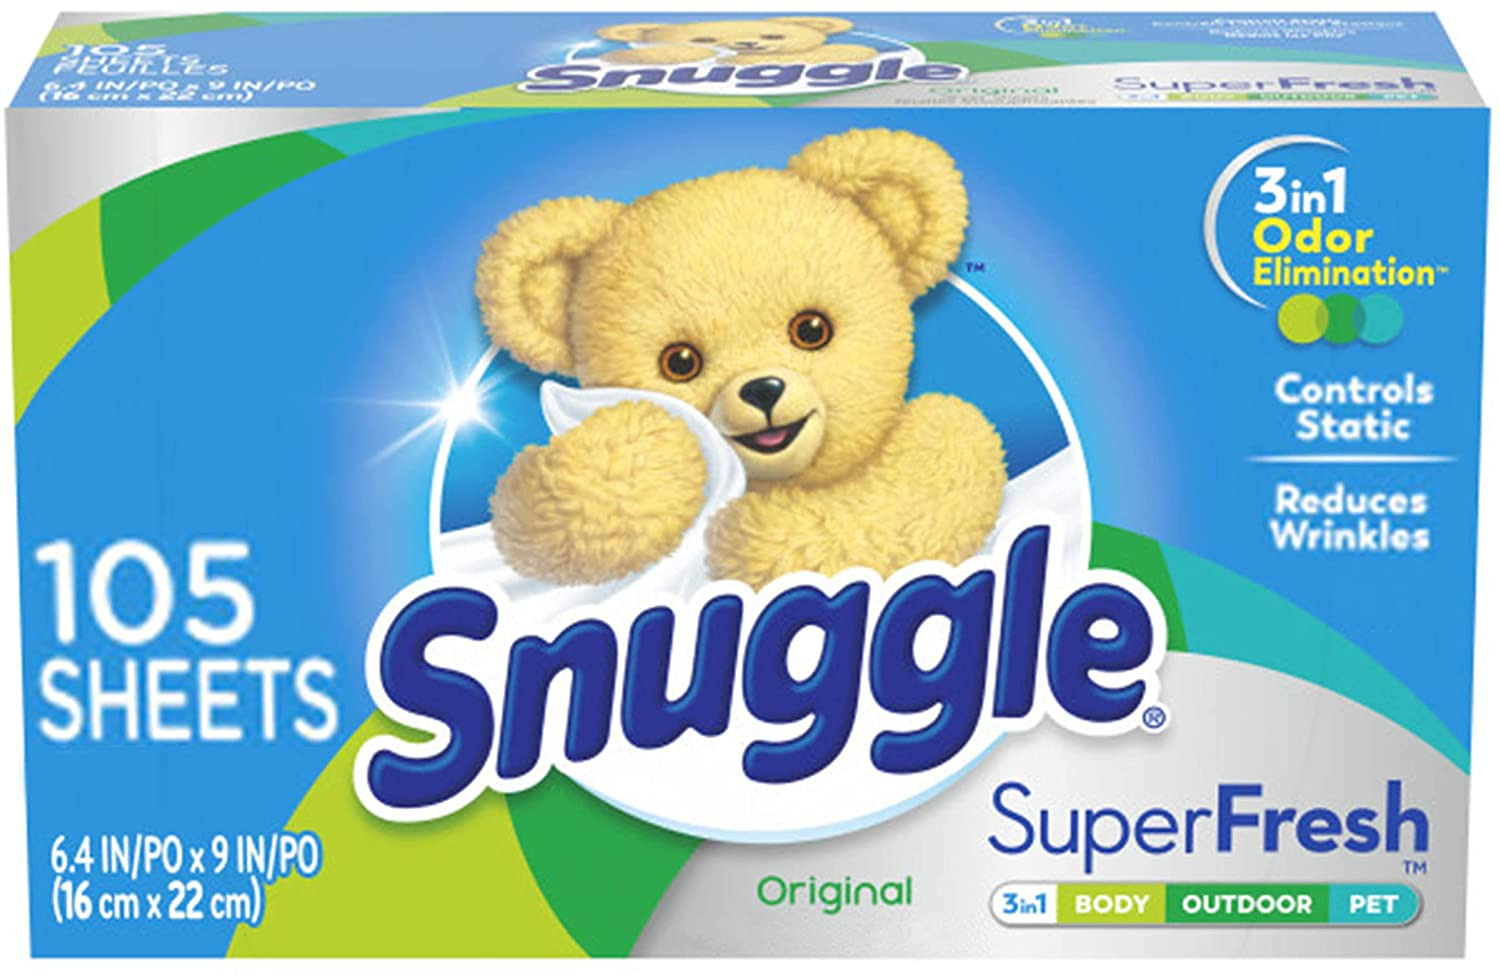 Snuggle plus Super Fresh Fabric Softener Dryer Sheets with Static Control and Od